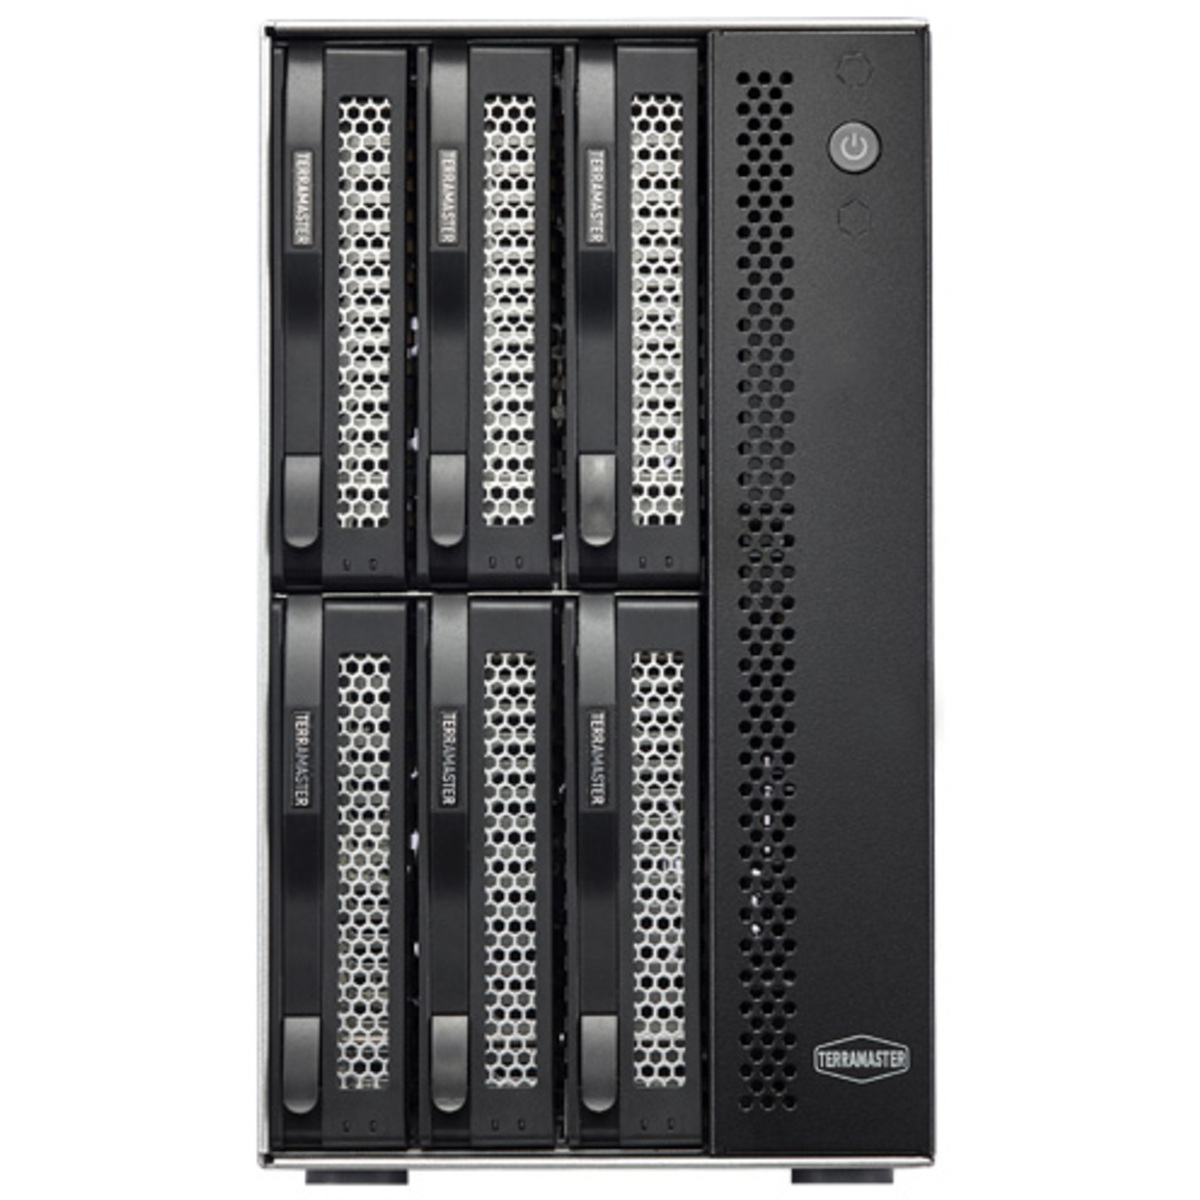 TerraMaster T6-423 90tb 6-Bay Desktop Multimedia / Power User / Business NAS - Network Attached Storage Device 5x18tb Western Digital Ultrastar DC HC550 WUH721818ALE6L4 3.5 7200rpm SATA 6Gb/s HDD ENTERPRISE Class Drives Installed - Burn-In Tested - FREE RAM UPGRADE T6-423